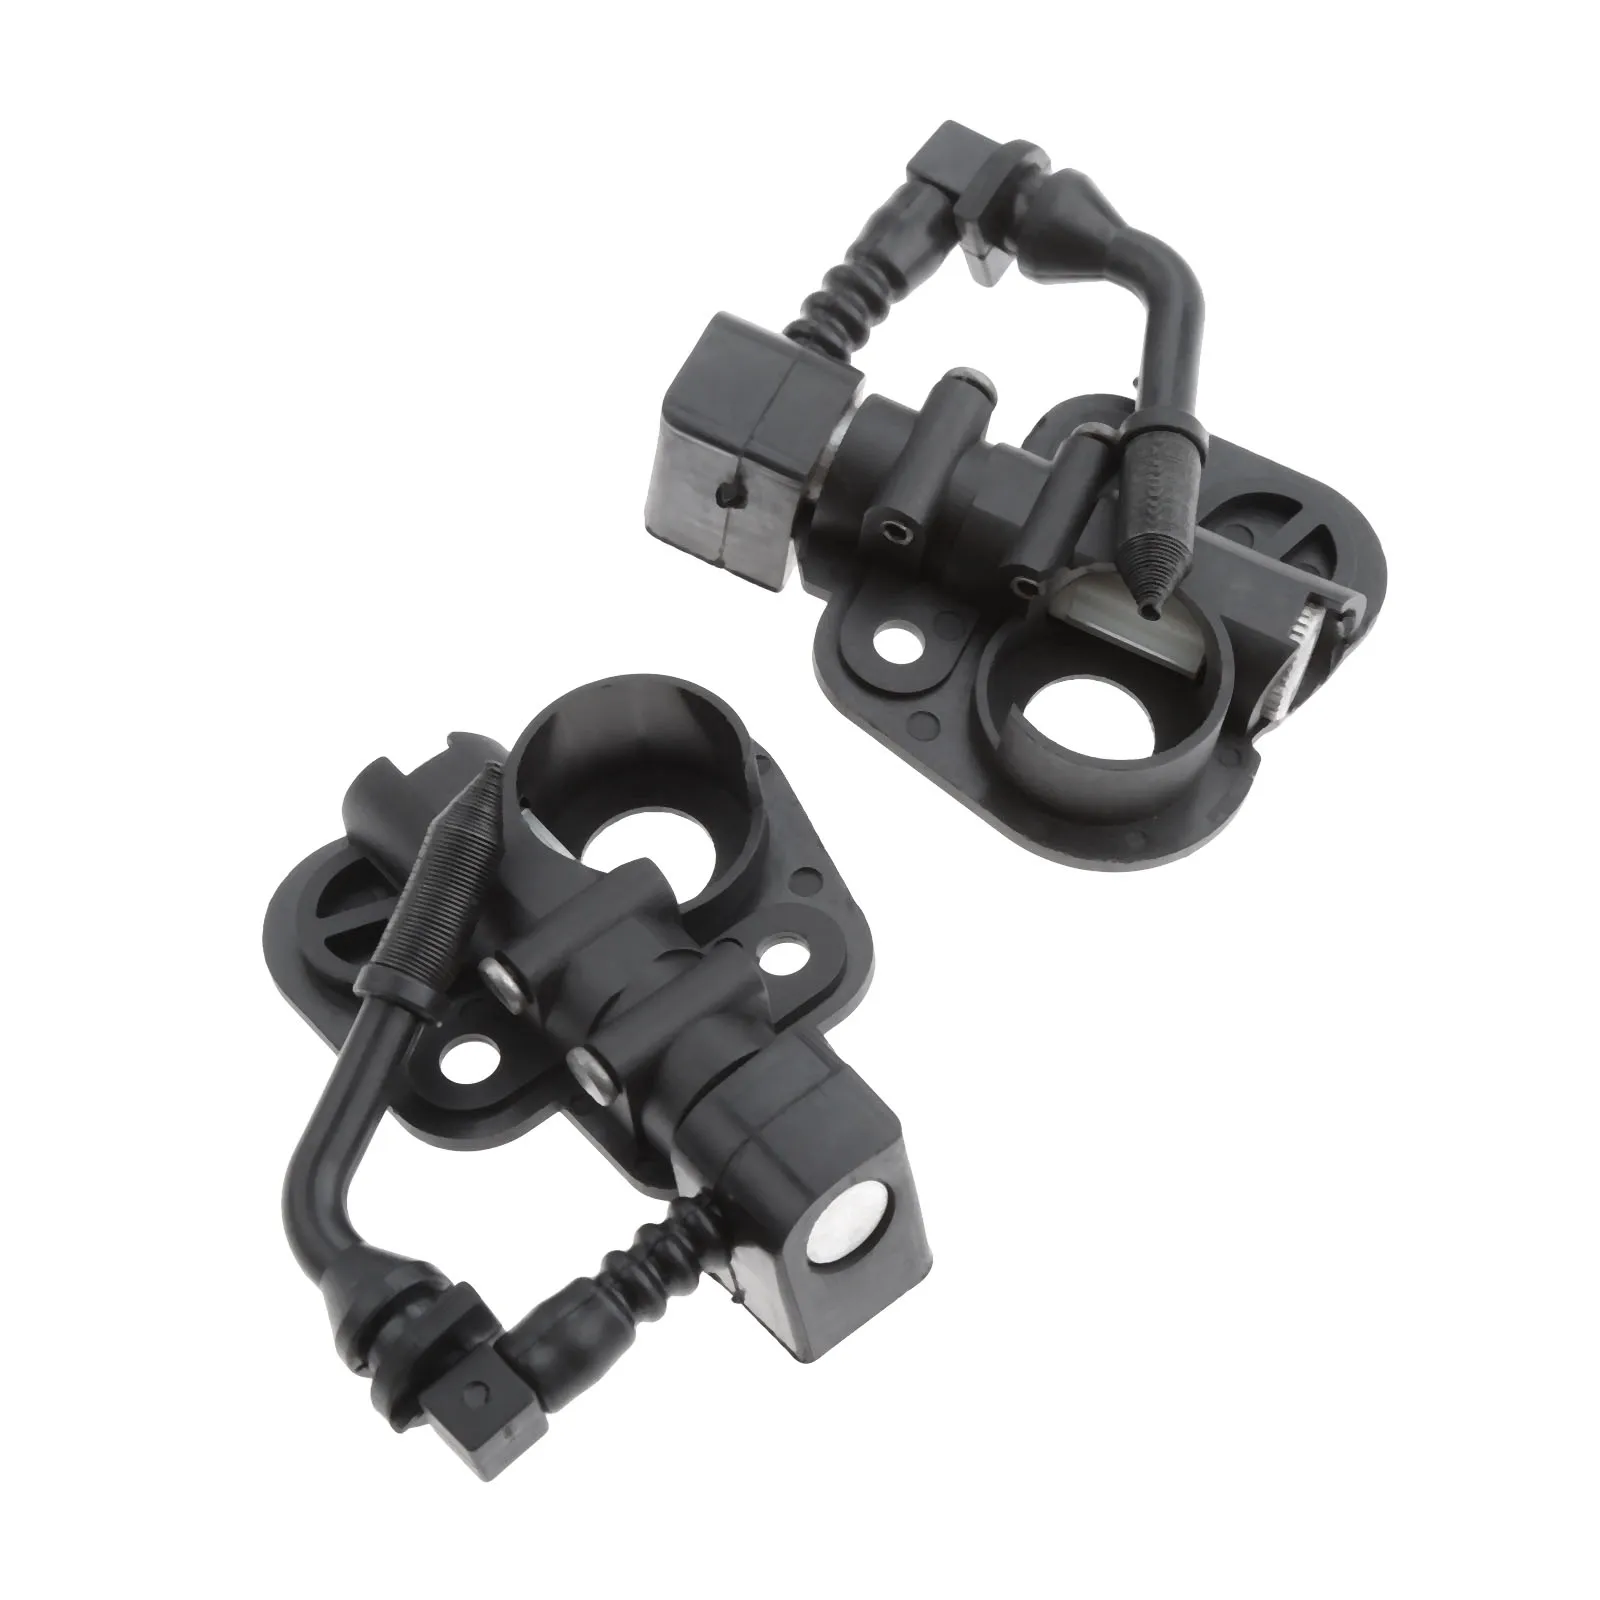 2Pcs Oil Pump for PARTNER 350 351 350 351 352 370 371 390 391 401 420 422 20X Chainsaw Model Garden Tool Parts